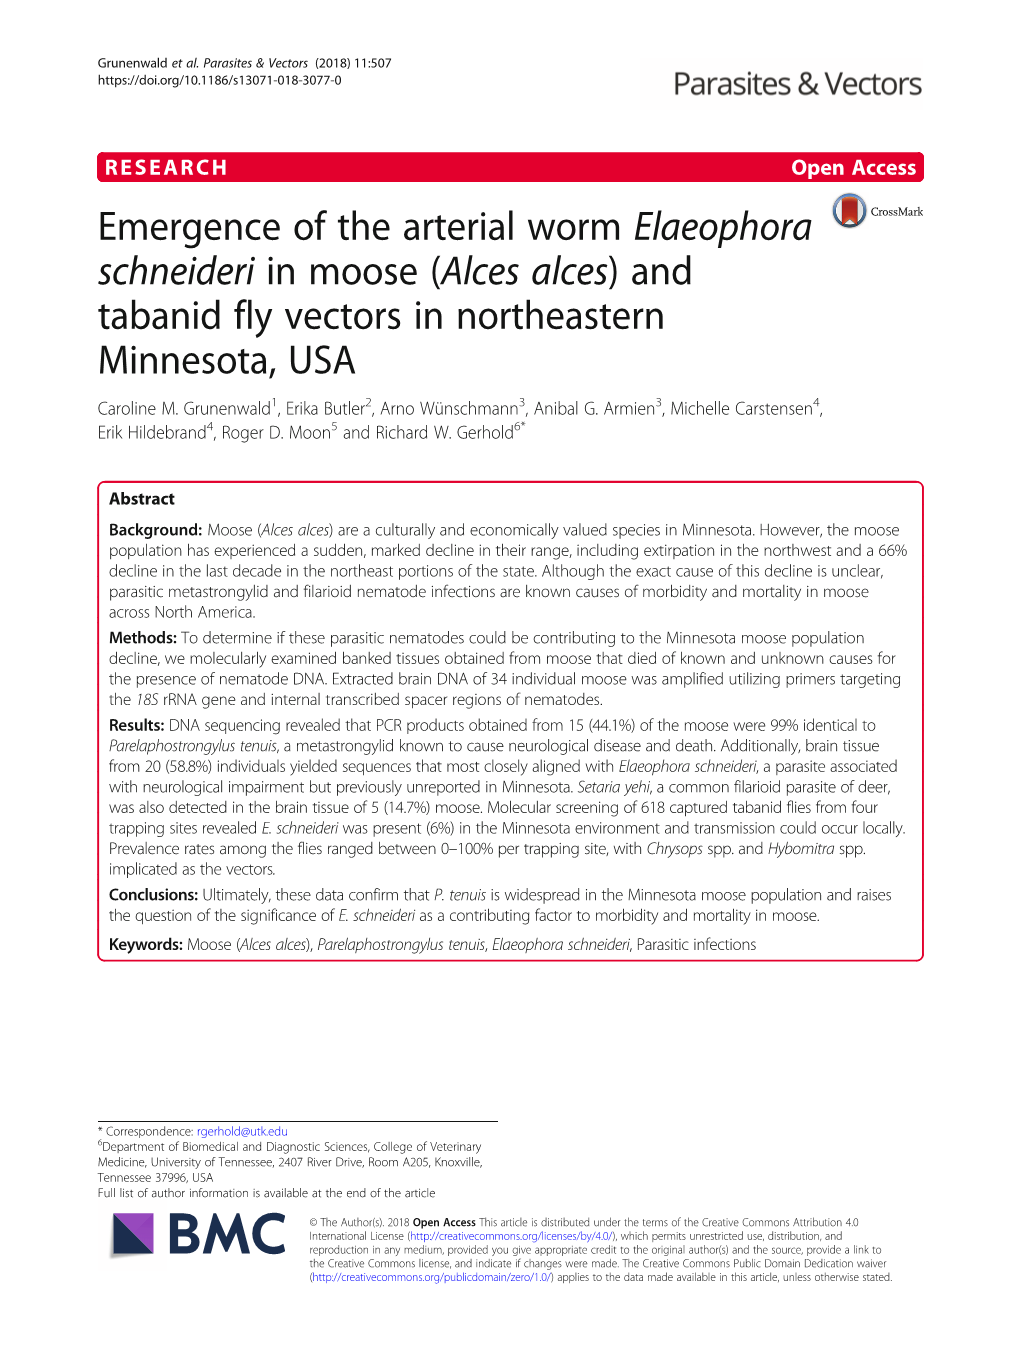 Emergence of the Arterial Worm Elaeophora Schneideri in Moose (Alces Alces) and Tabanid Fly Vectors in Northeastern Minnesota, USA Caroline M